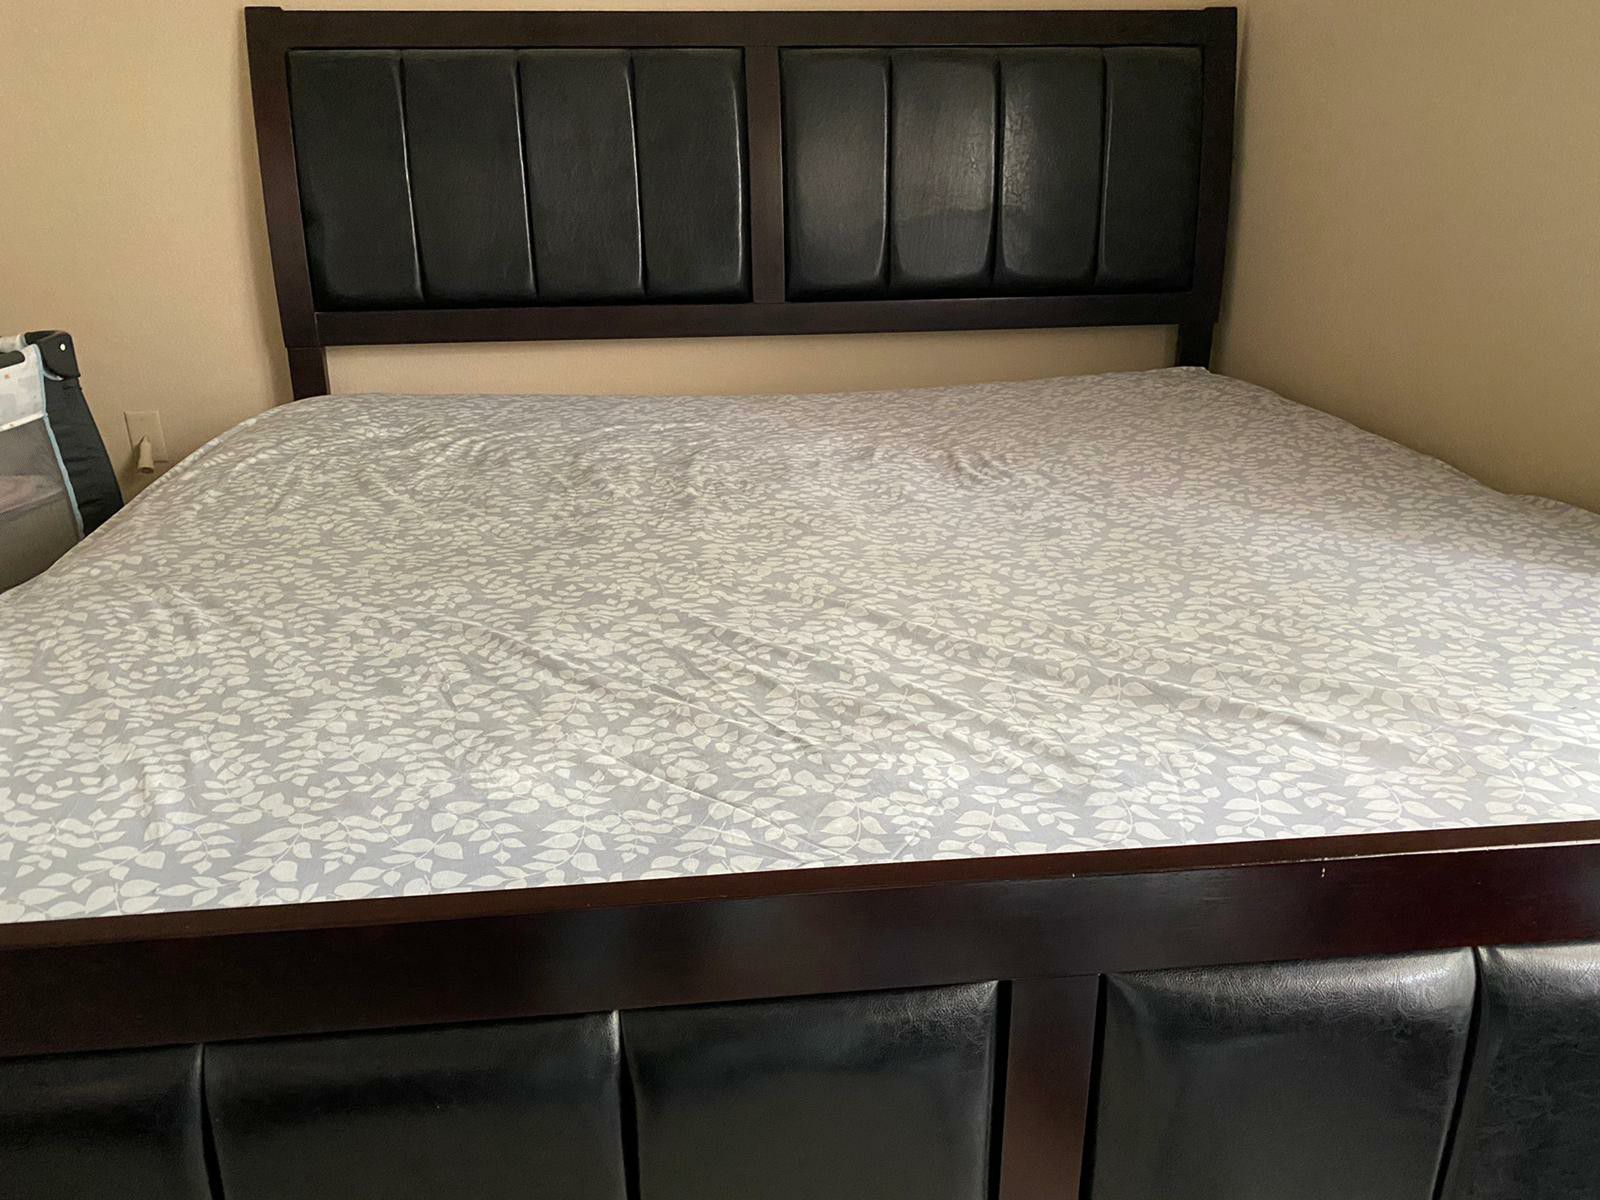 Bedroom set without mattress